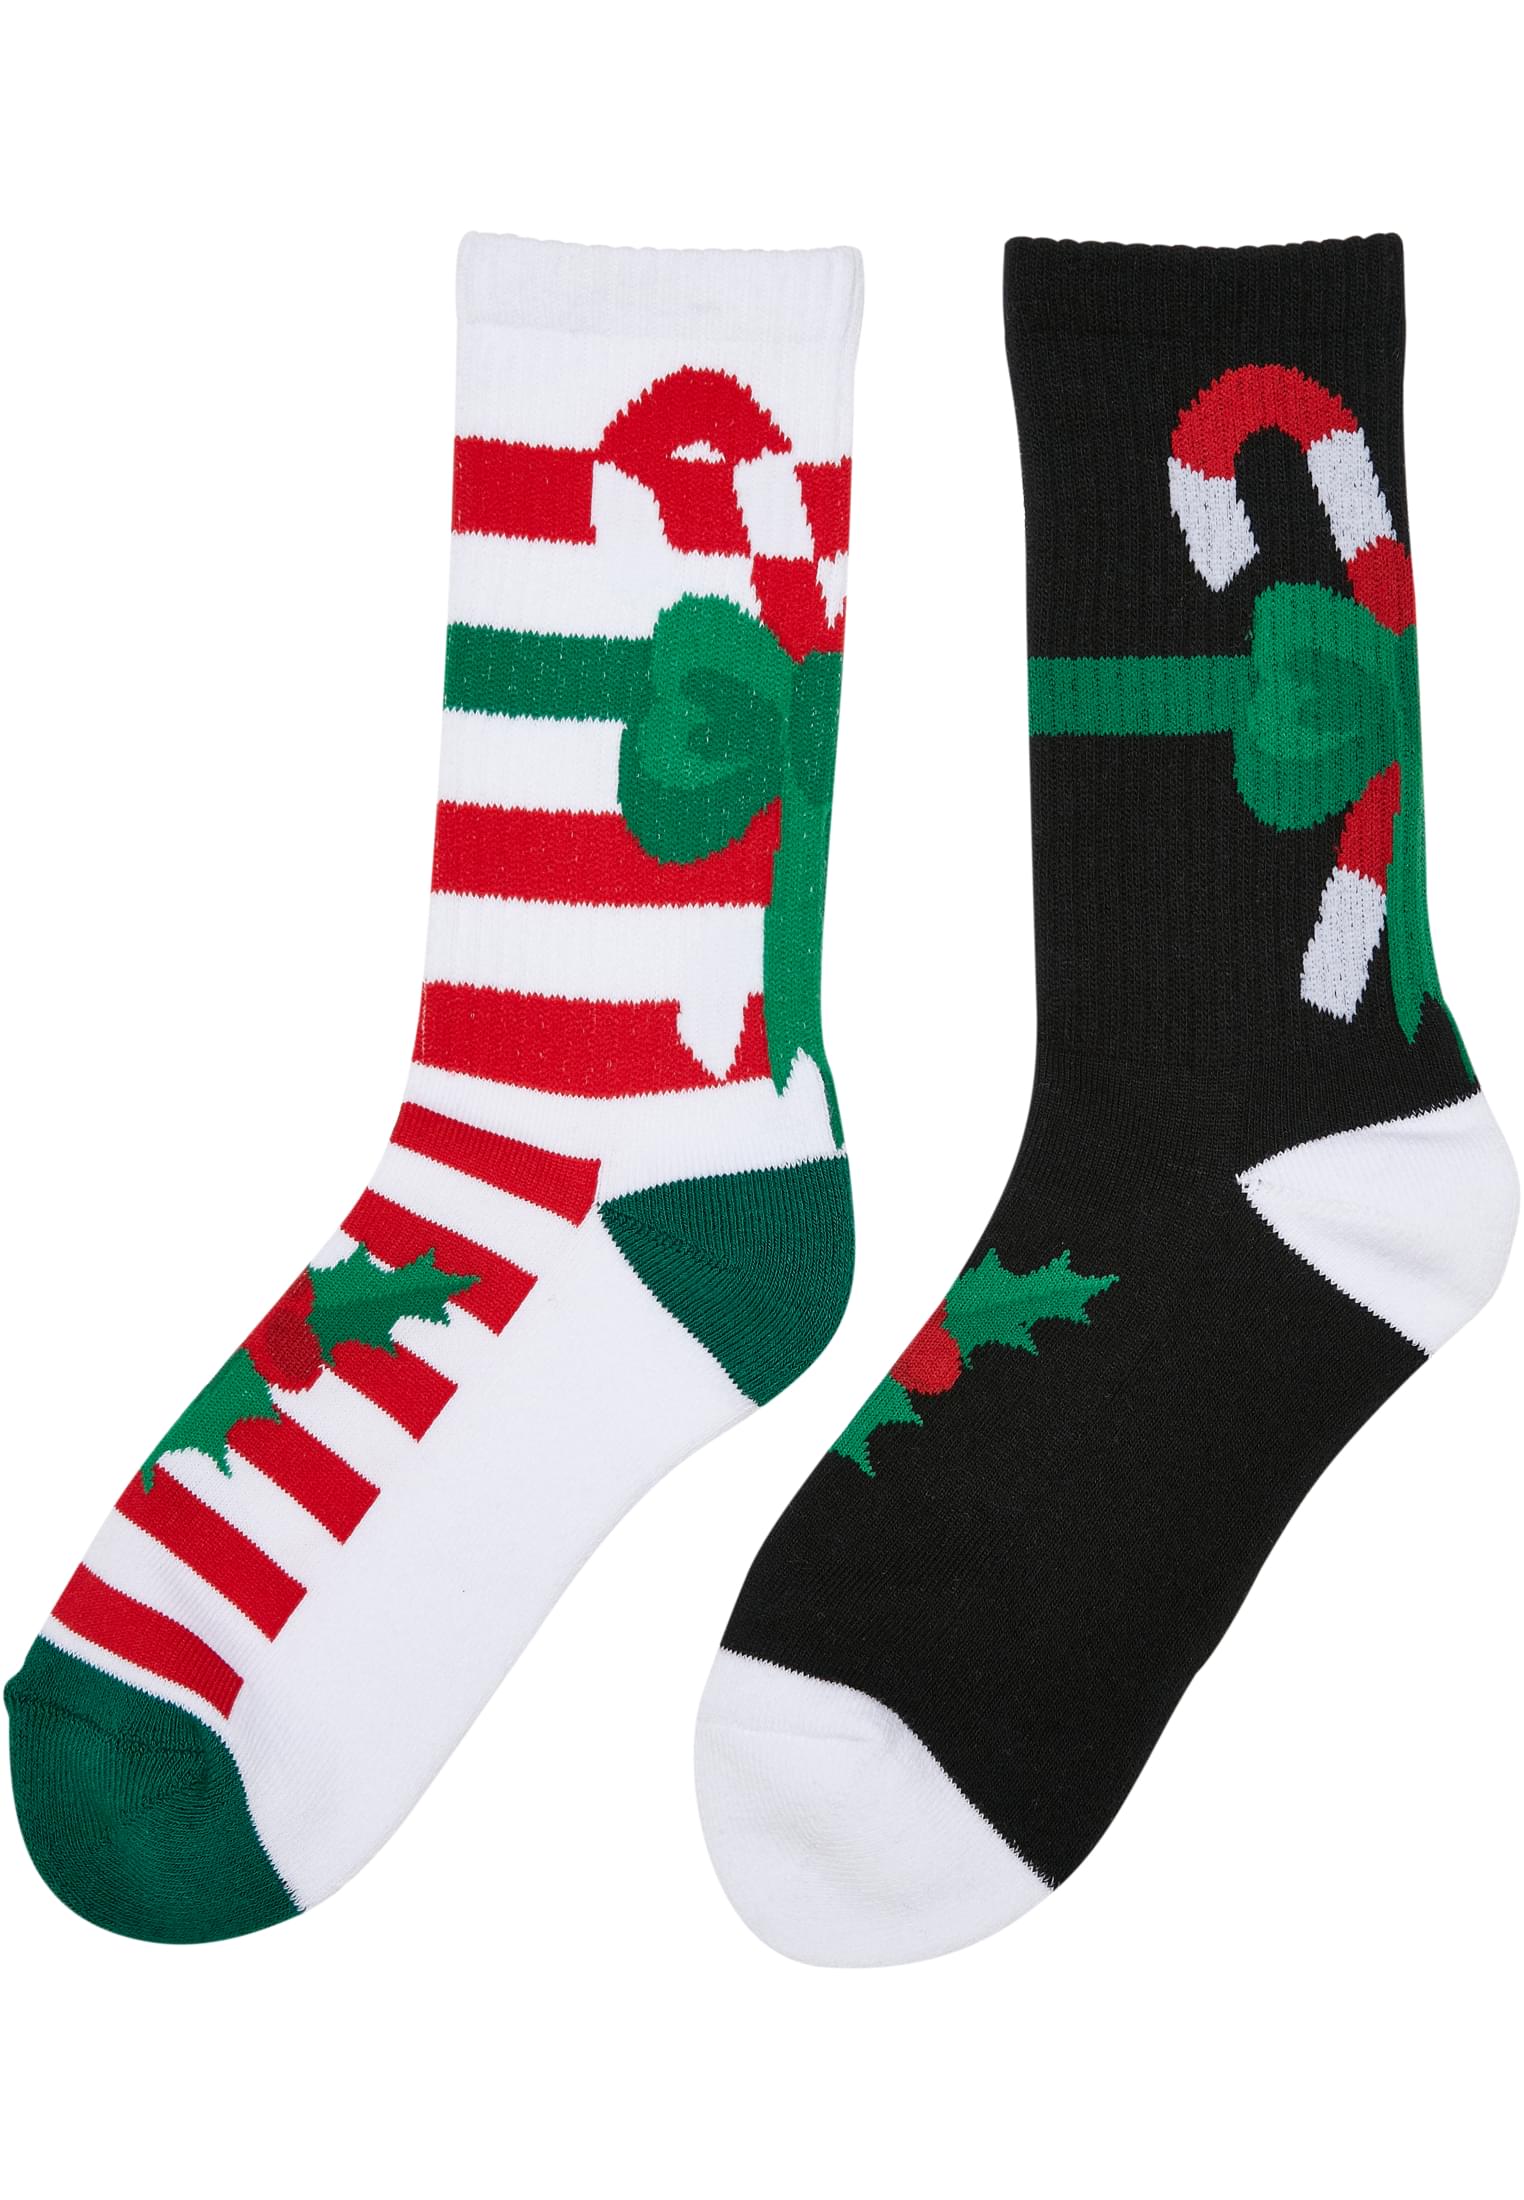 X-Mas Candy Christmas Socks - 2-Pack Multicolored